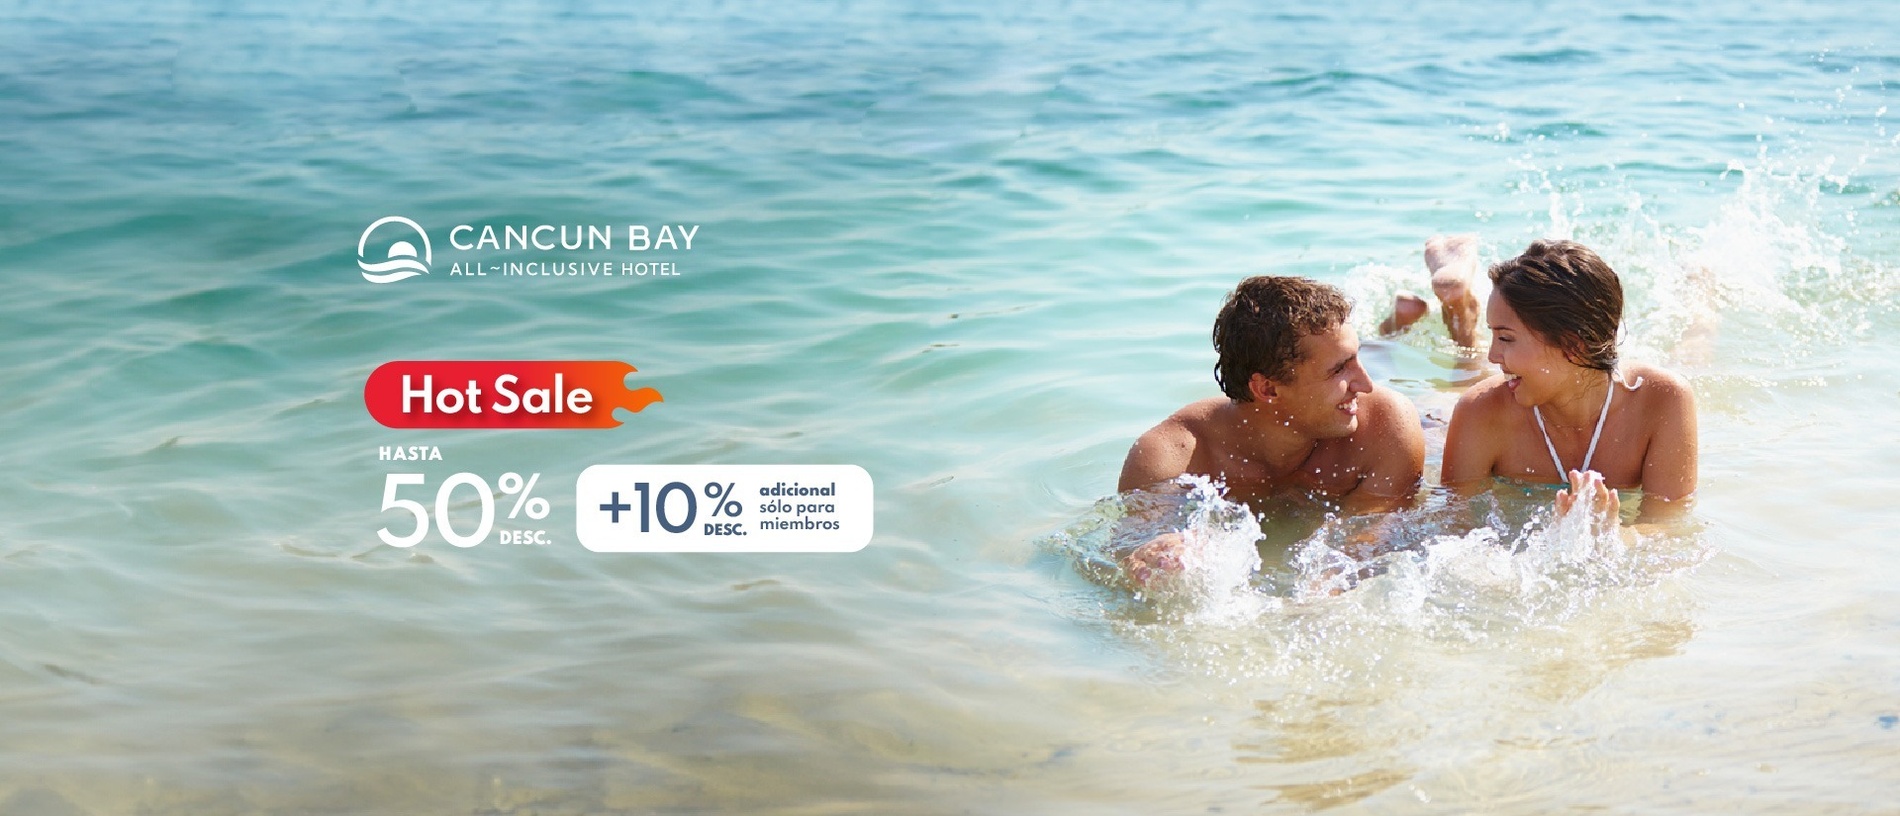 an advertisement for cancun bay all-inclusive hotel